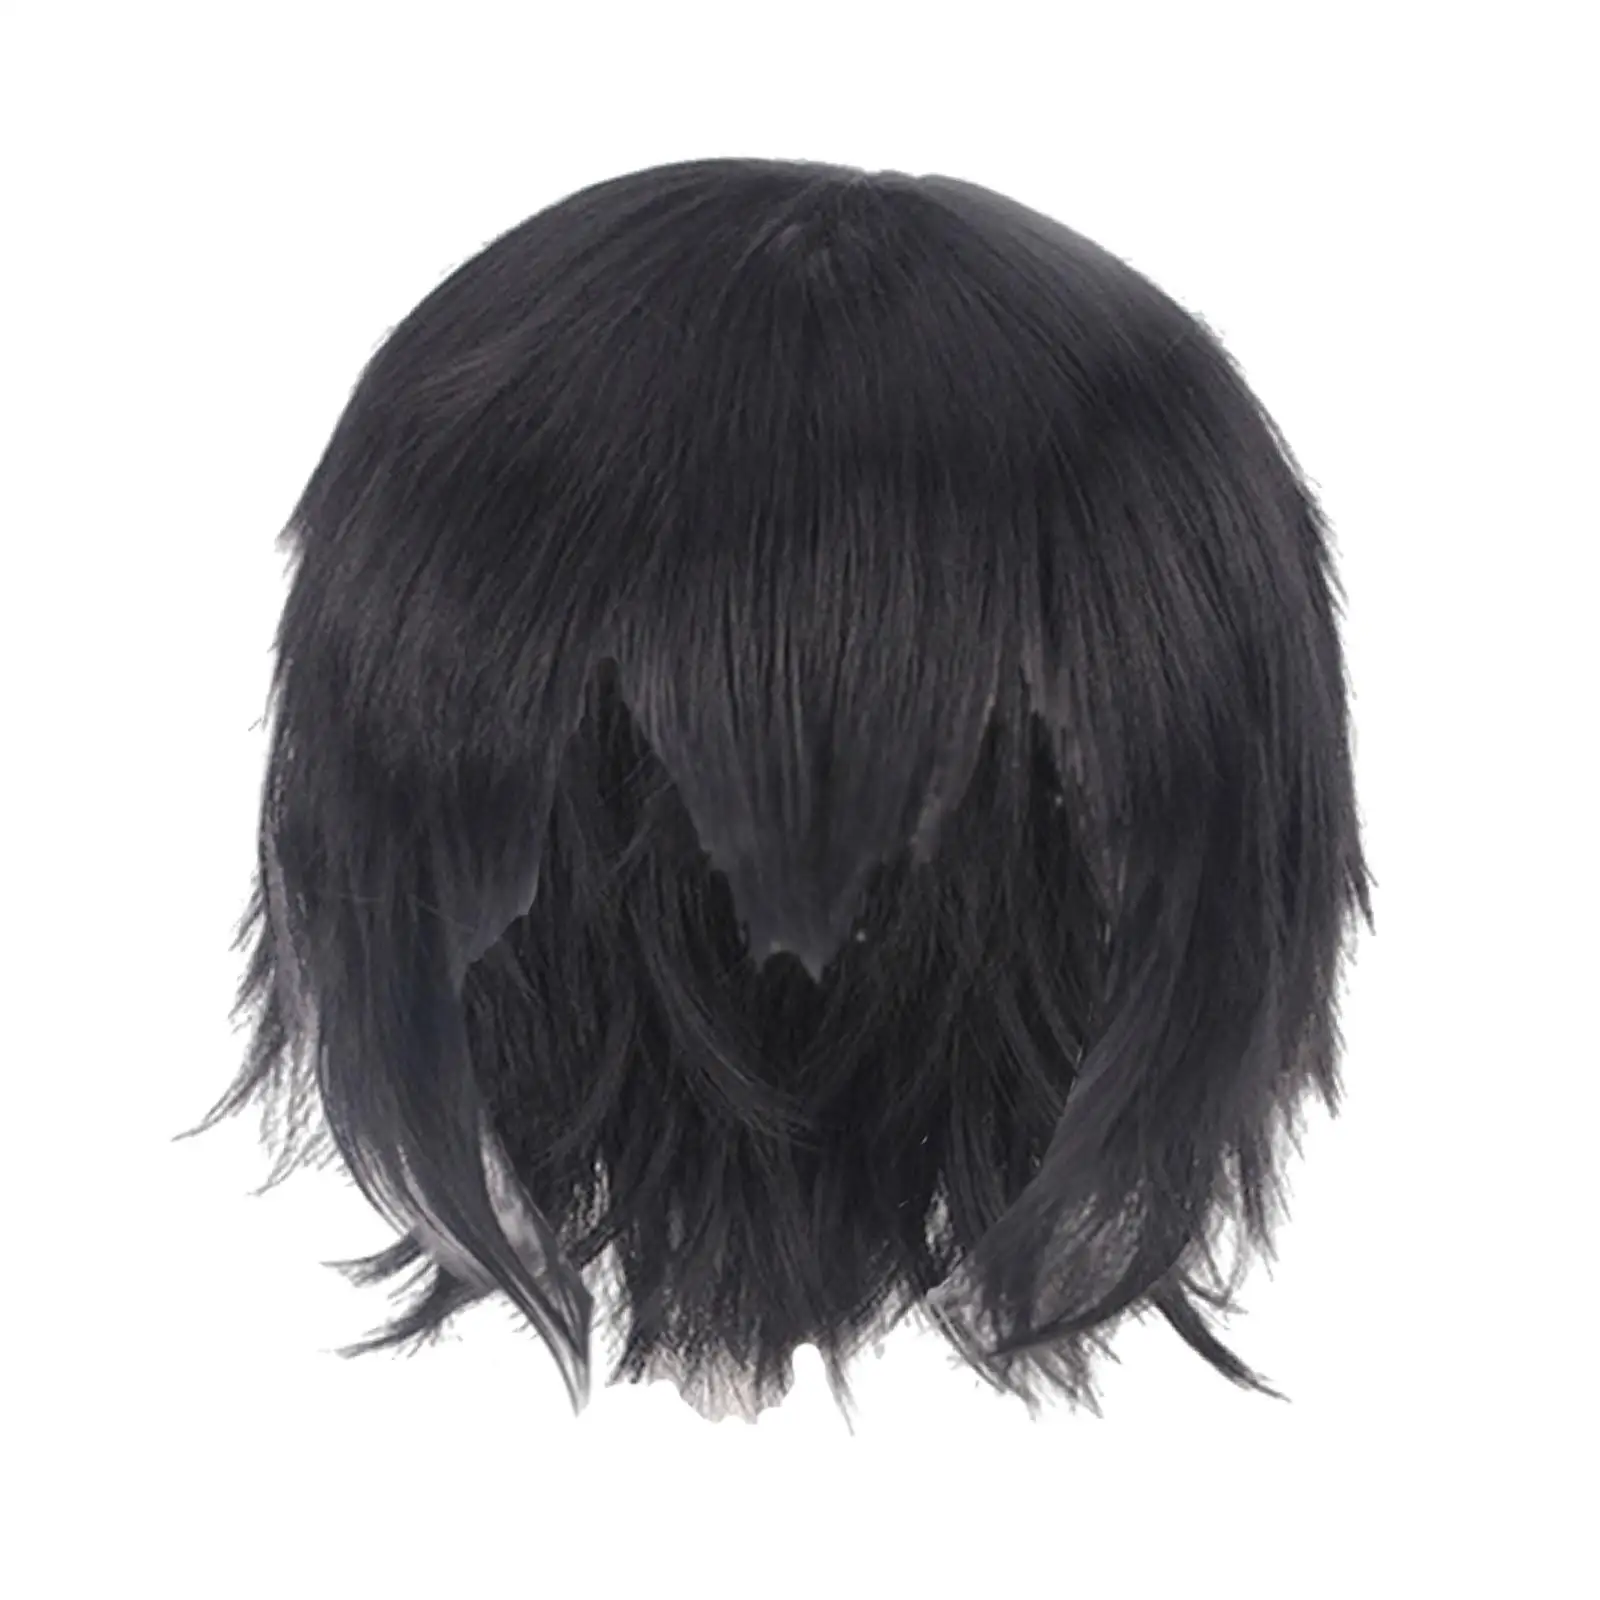 Cosplay Wig Costume Wig Spiky Lightweight Practical Basic Short Wig Full Wig for Halloween Costume Theme Party Women